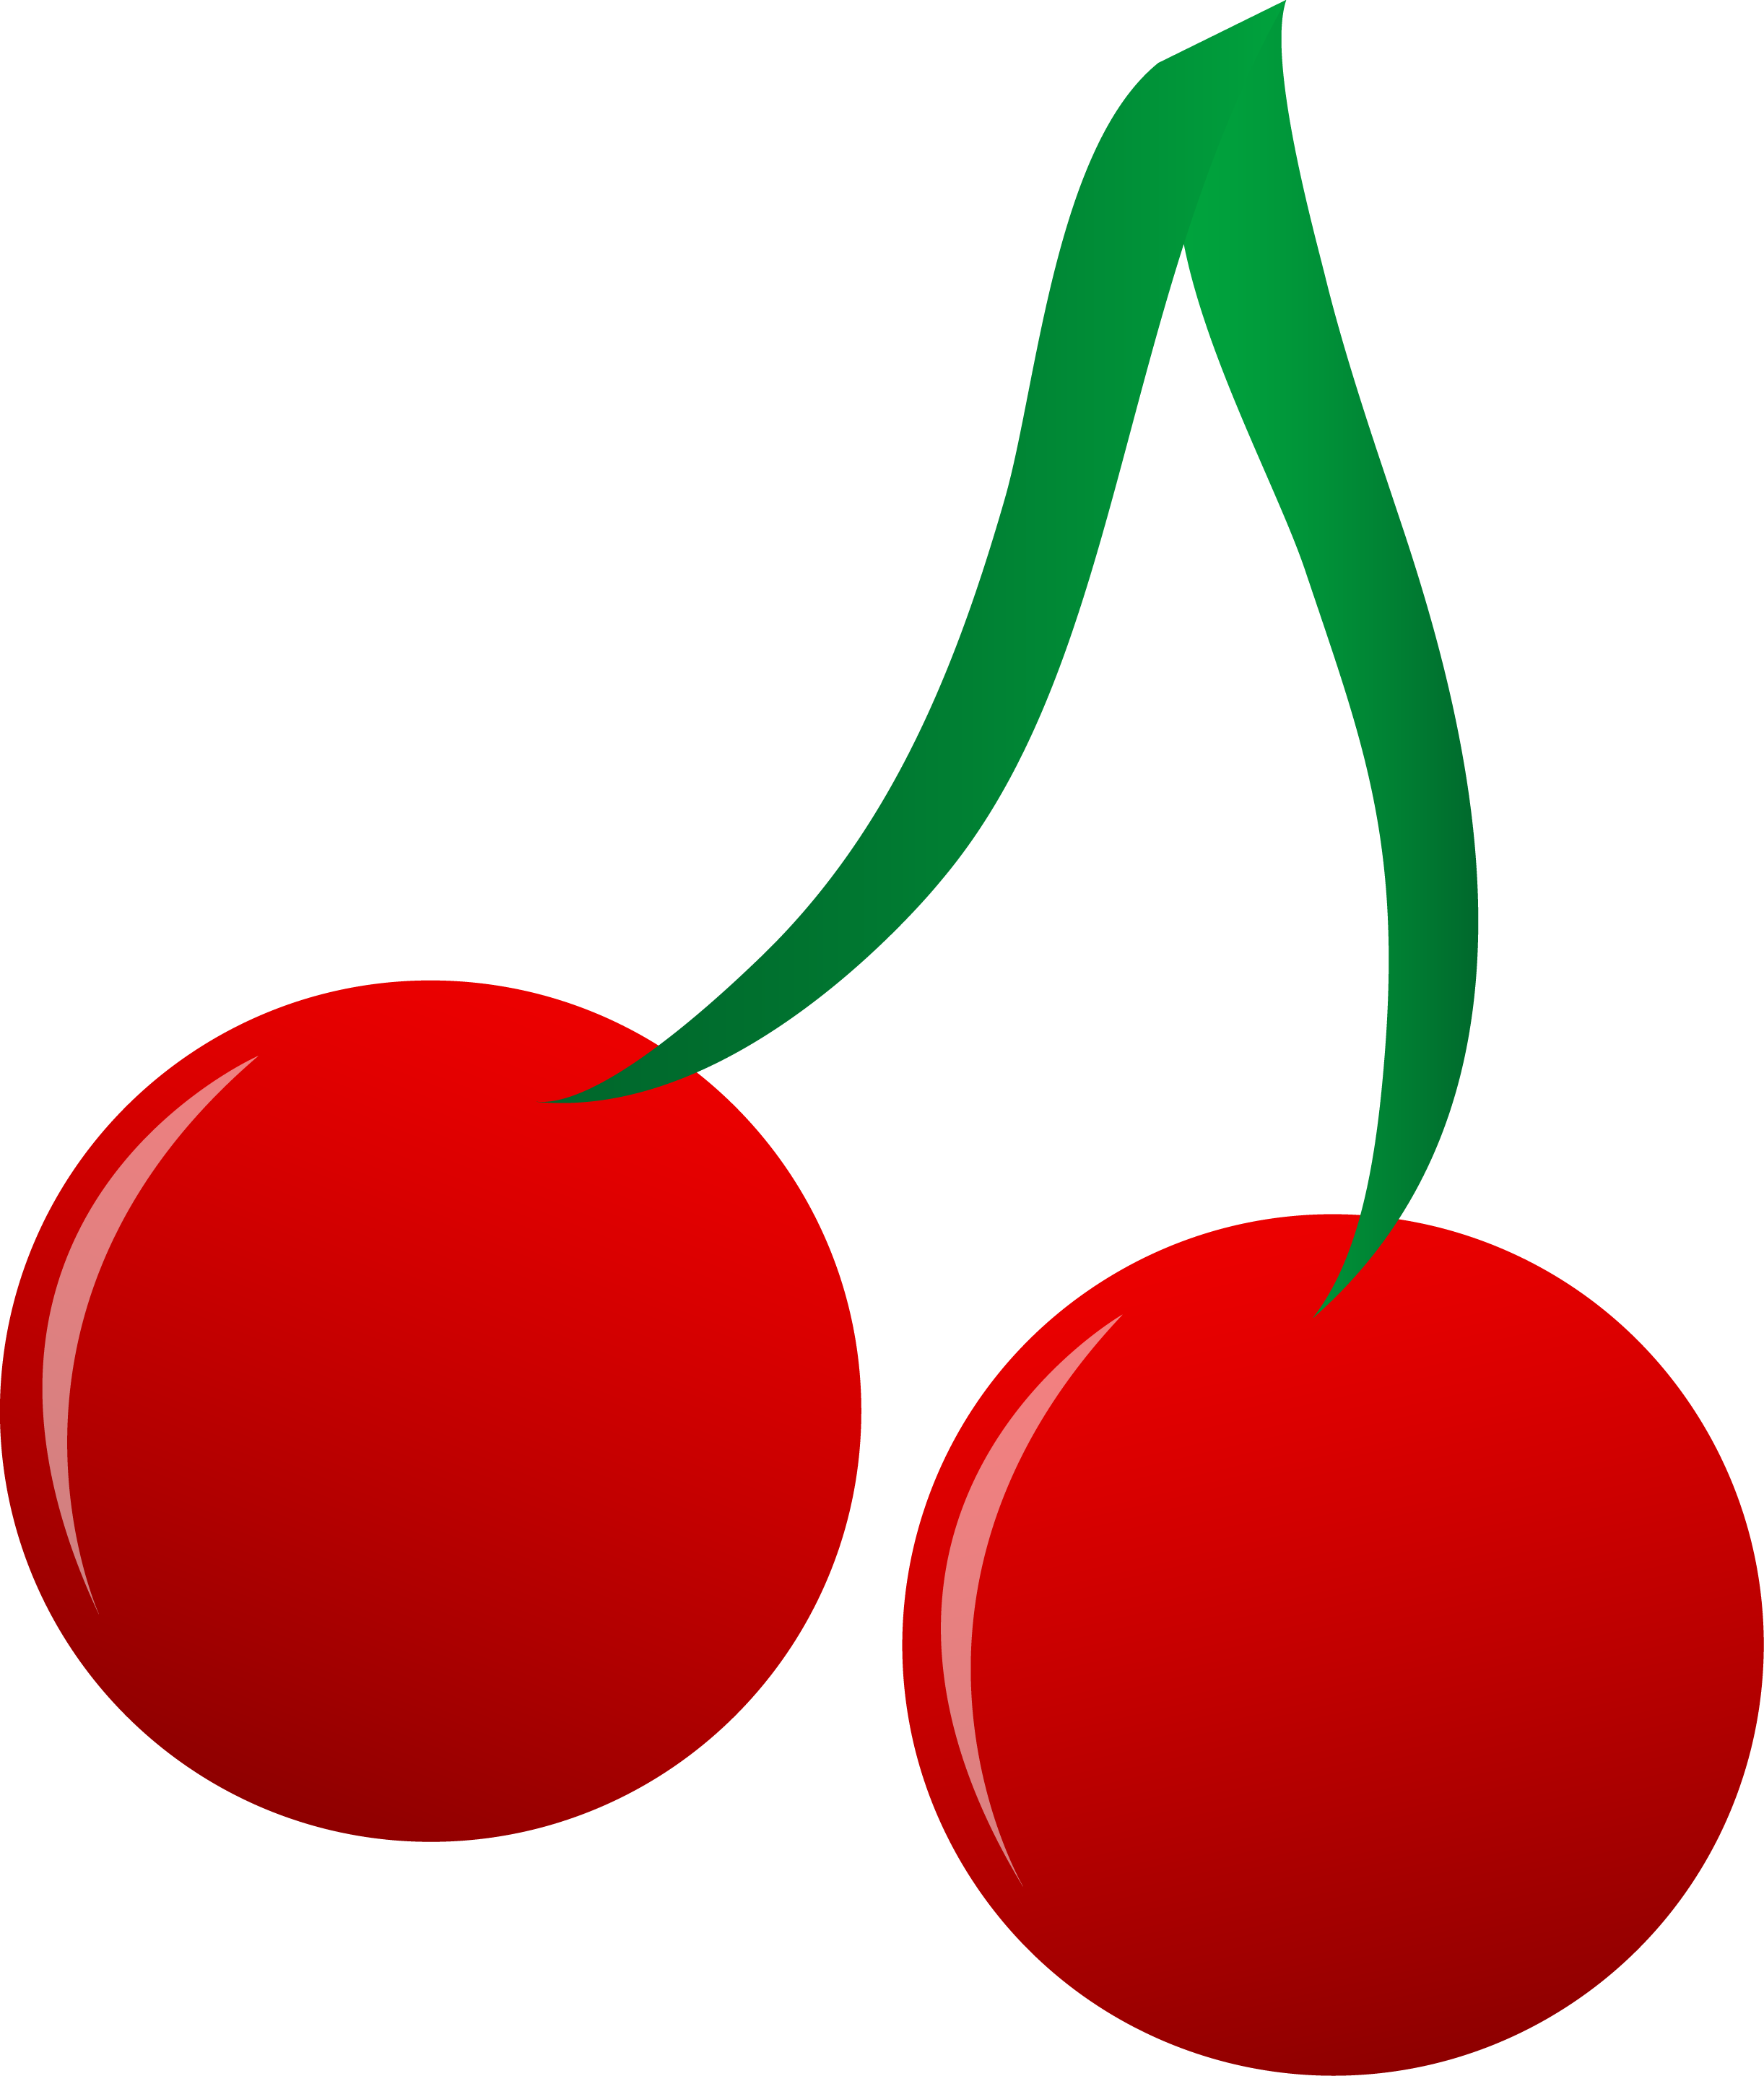 Free Cherry Cartoon Cliparts, Download Free Clip Art, Free